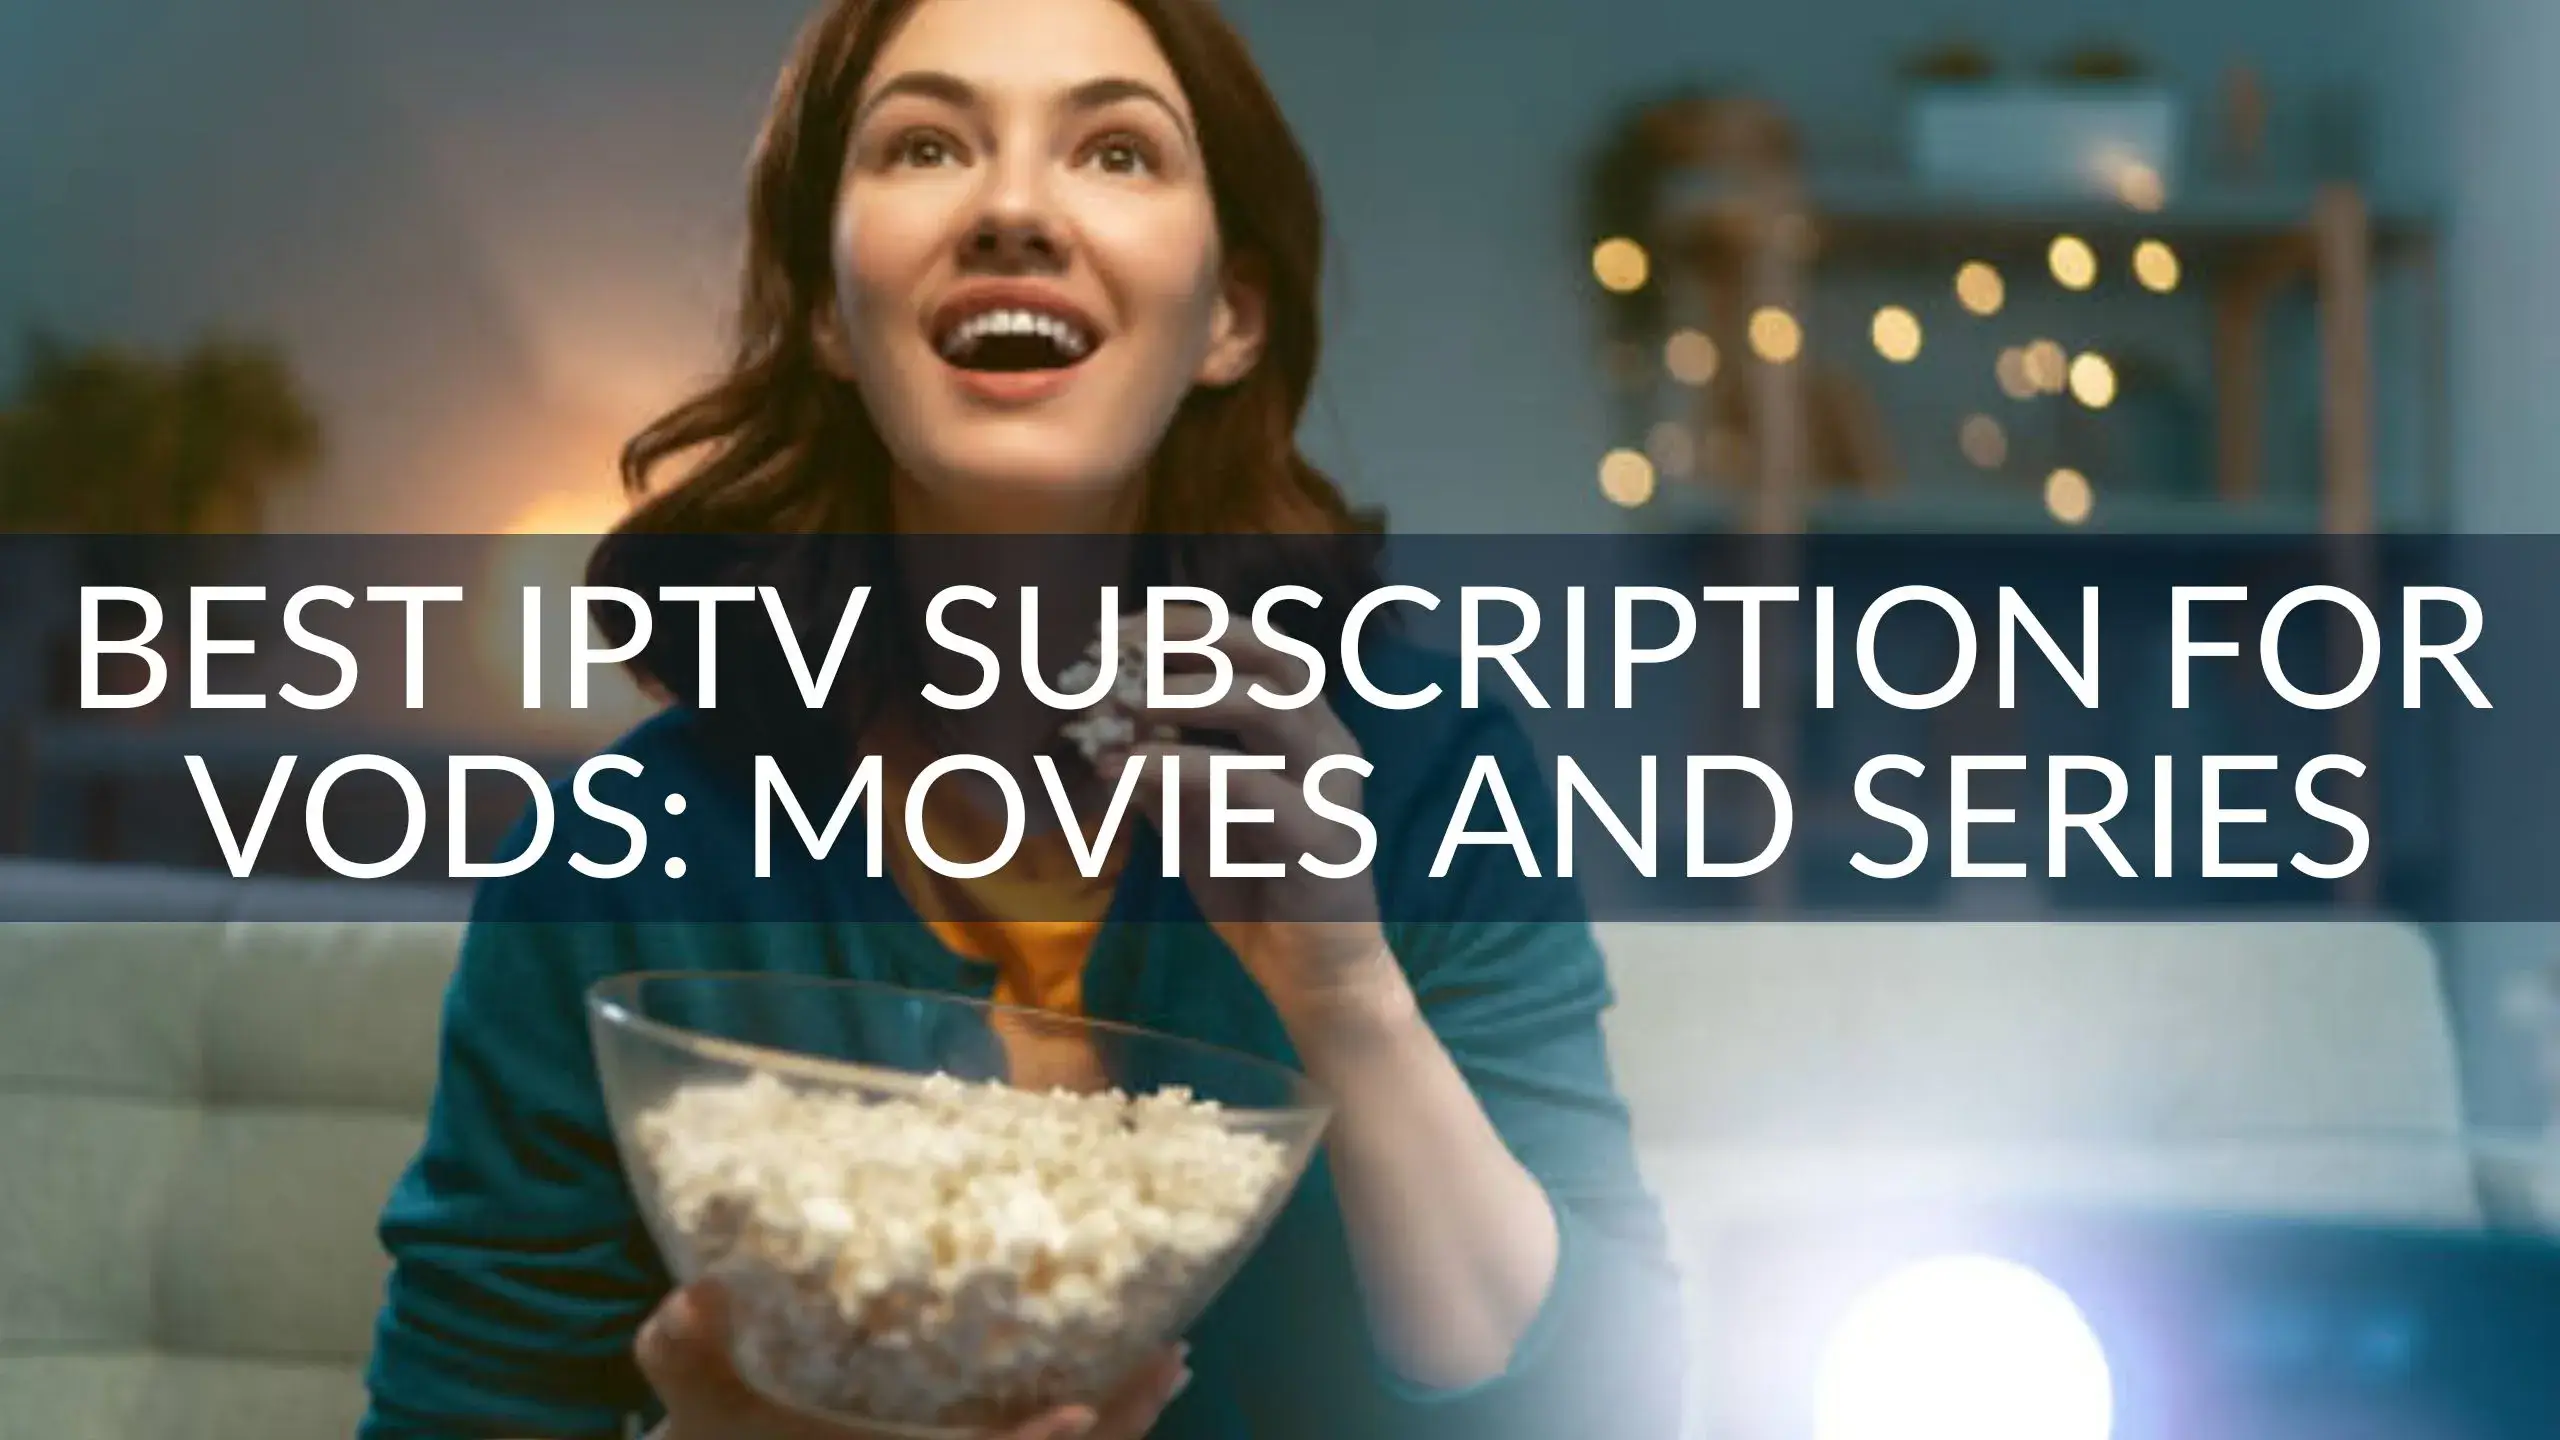 Best IPTV Subscription for VODs Movies and Series